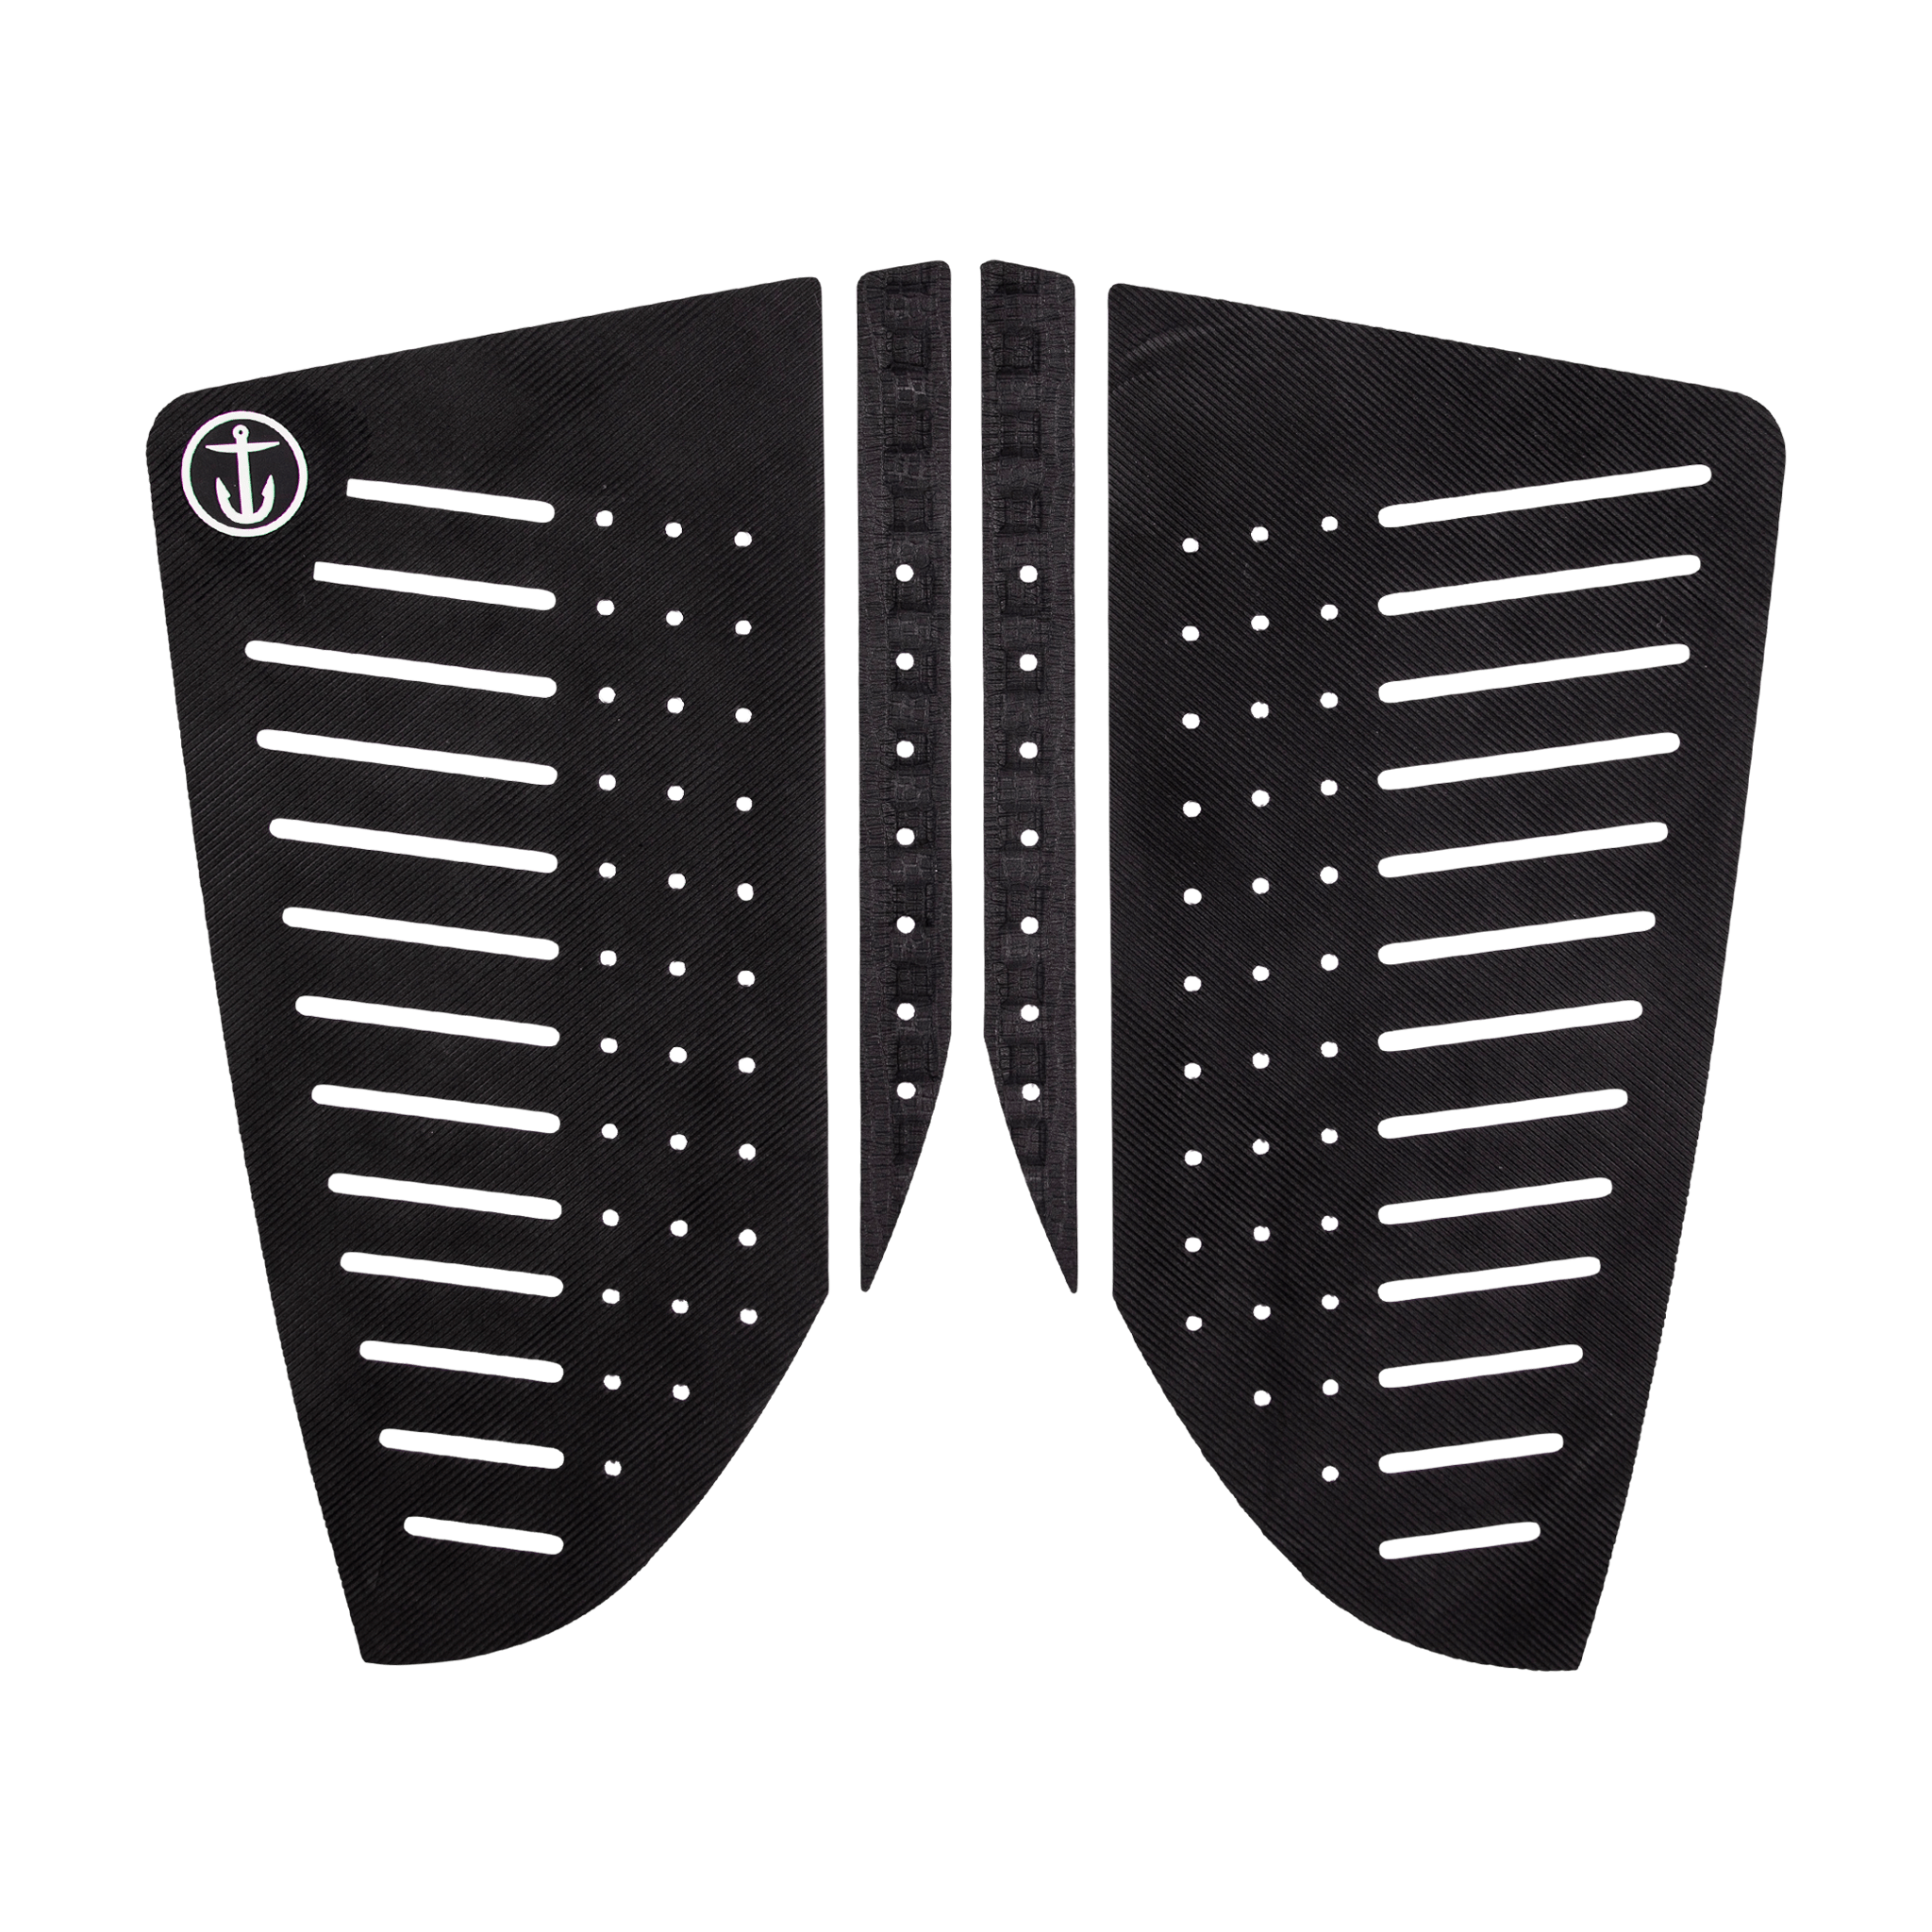 Trooper 2 Traction Pad - Black